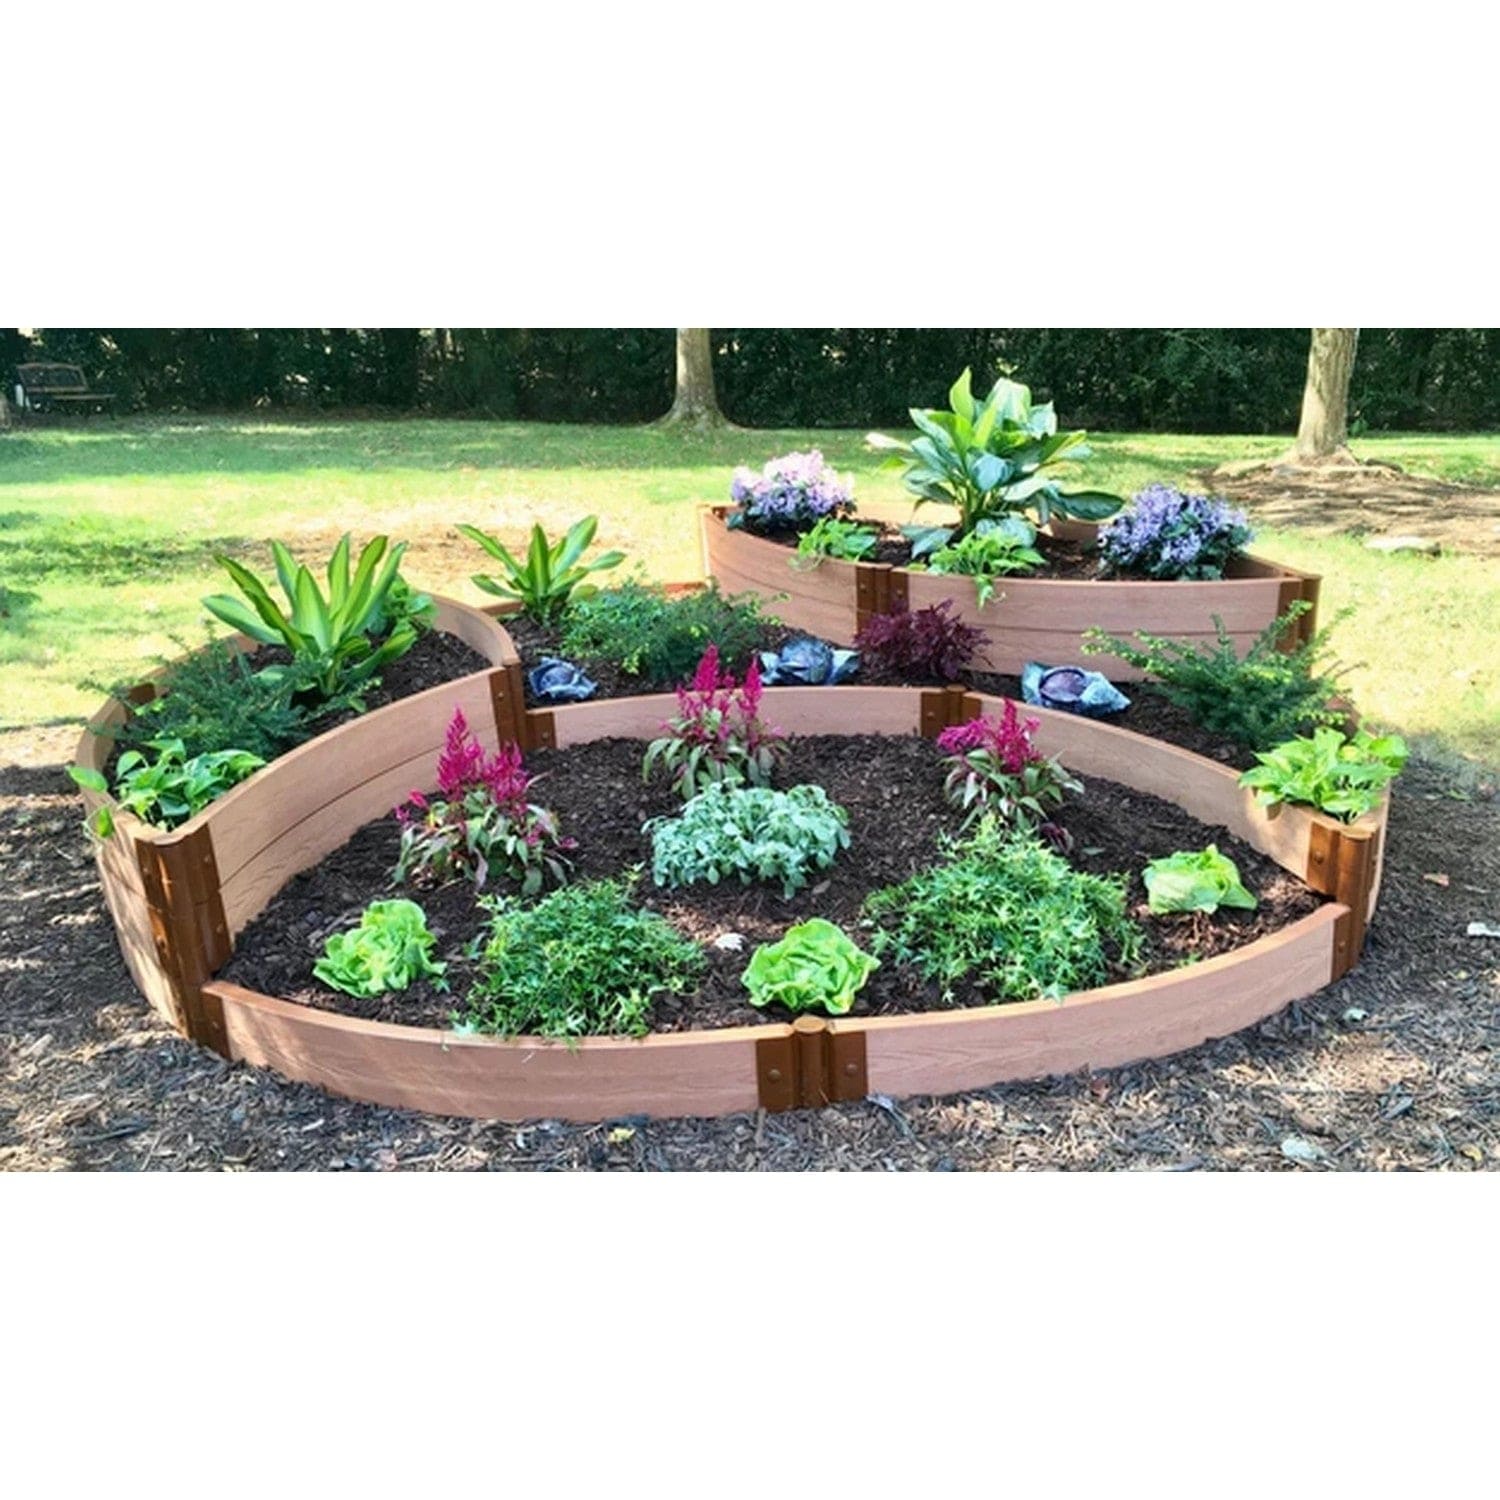 Frame It All Gardening Accessories Frame It All | Tool-Free Circle Quadruple Raised Garden Bed 10' X 10' X 22" - Uptown Brown - 1" Profile 800001043